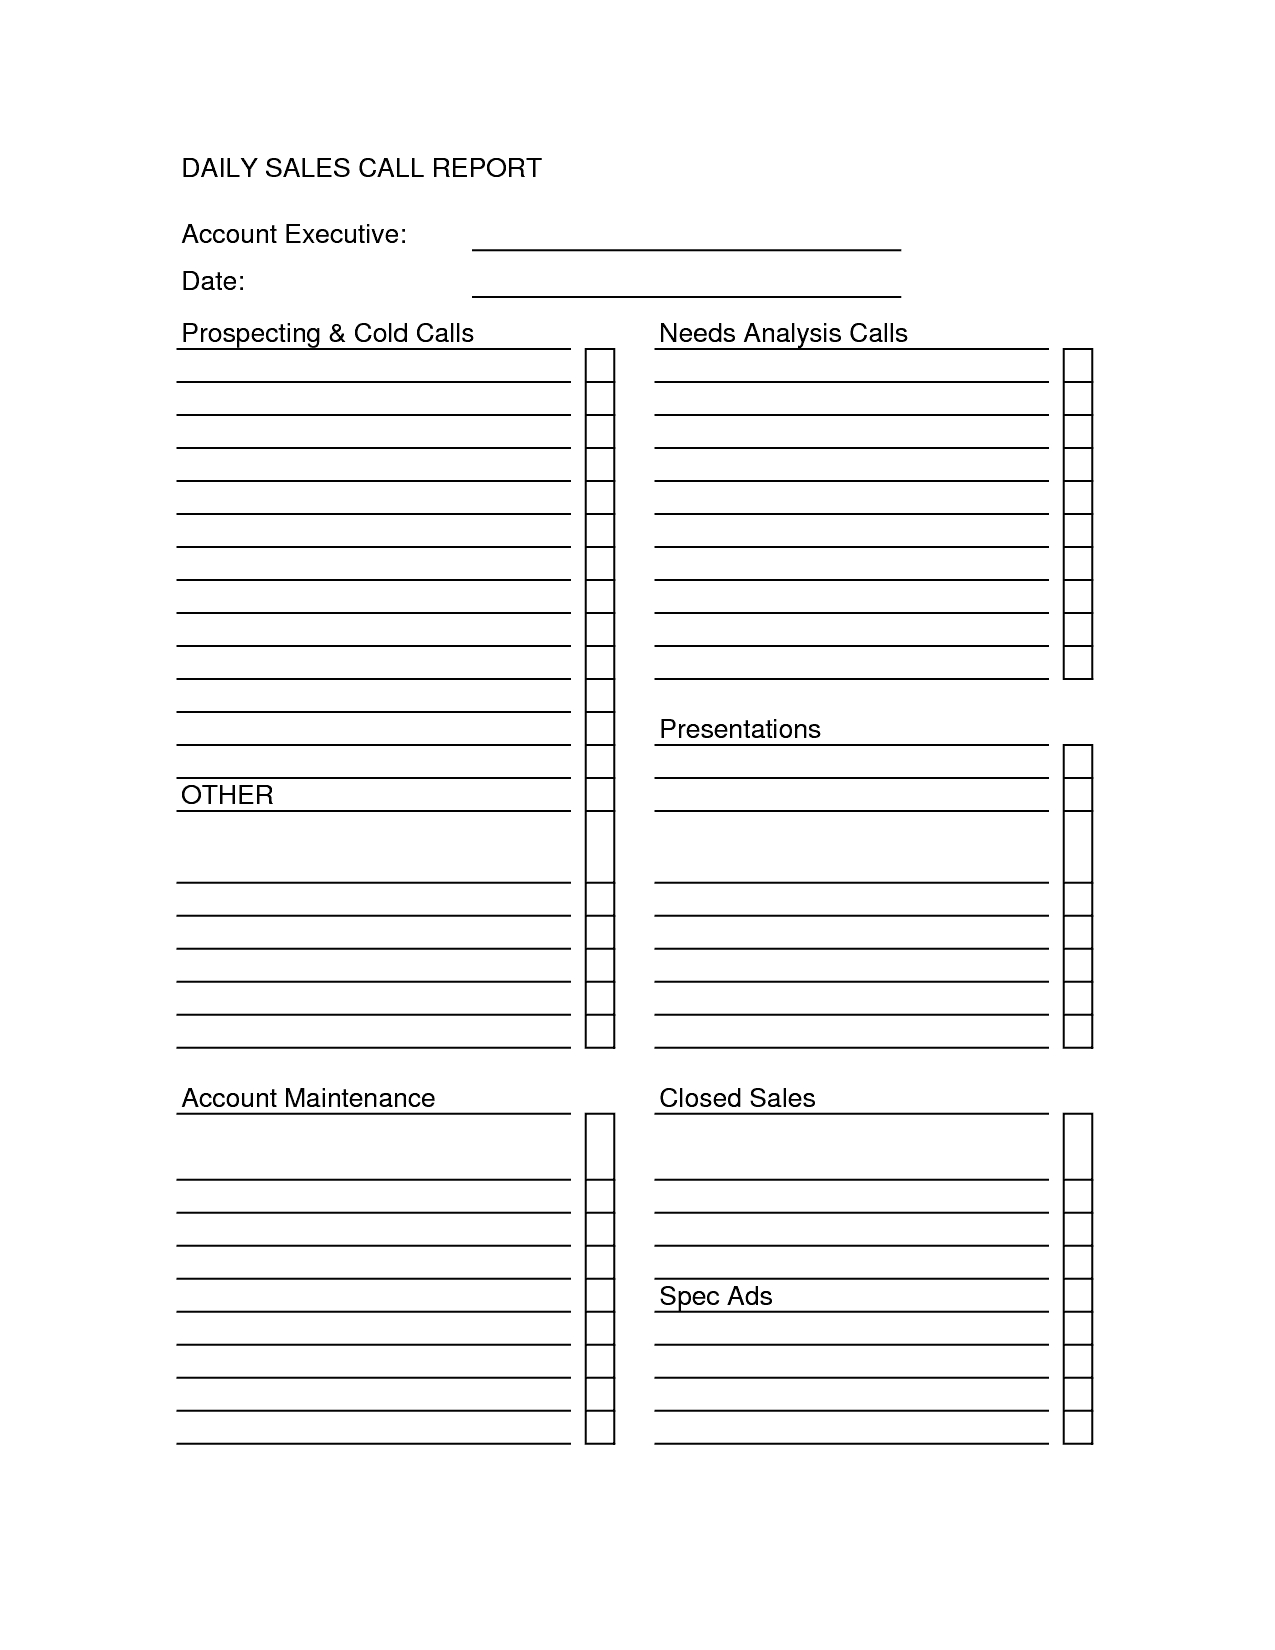 Sales Call Report Templates - Word Excel Fomats Within Sales Visit Report Template Downloads